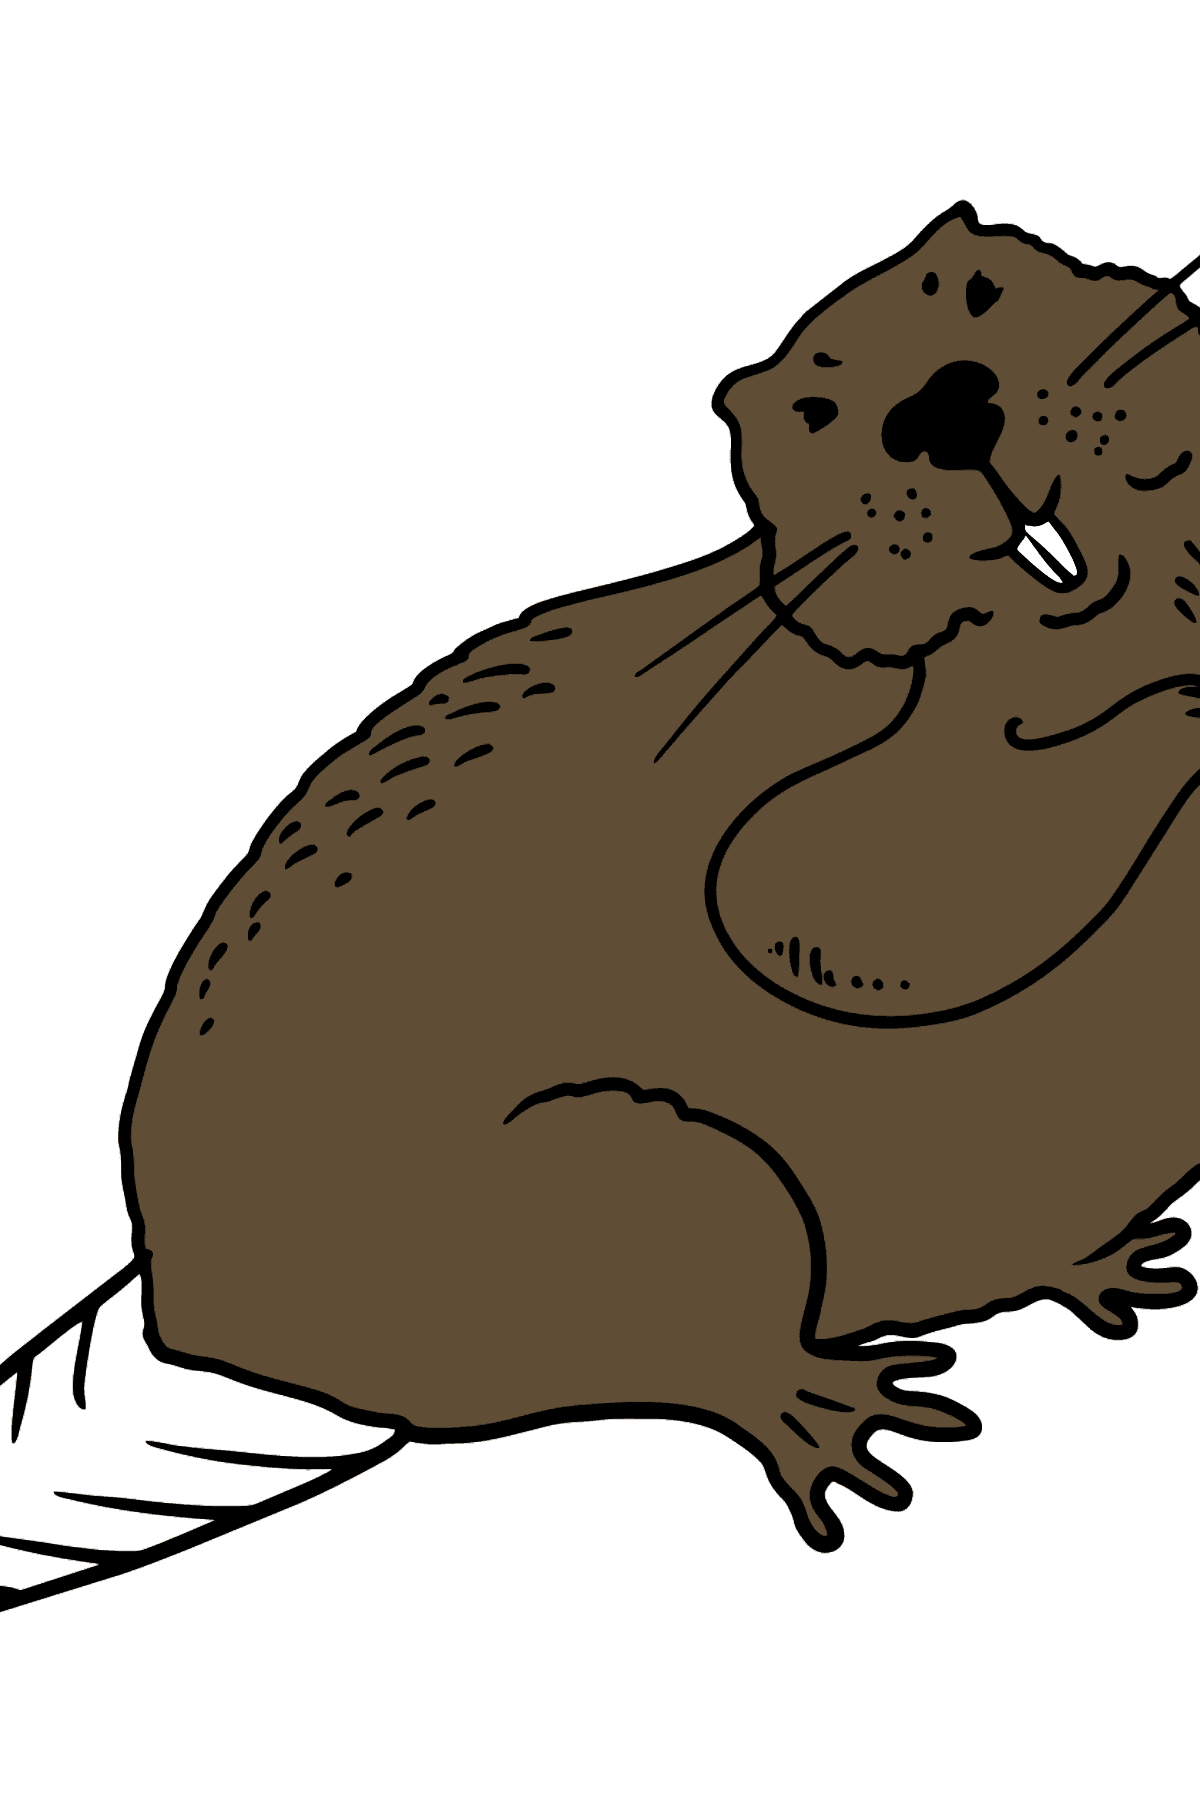 Beaver coloring page - Coloring Pages for Kids